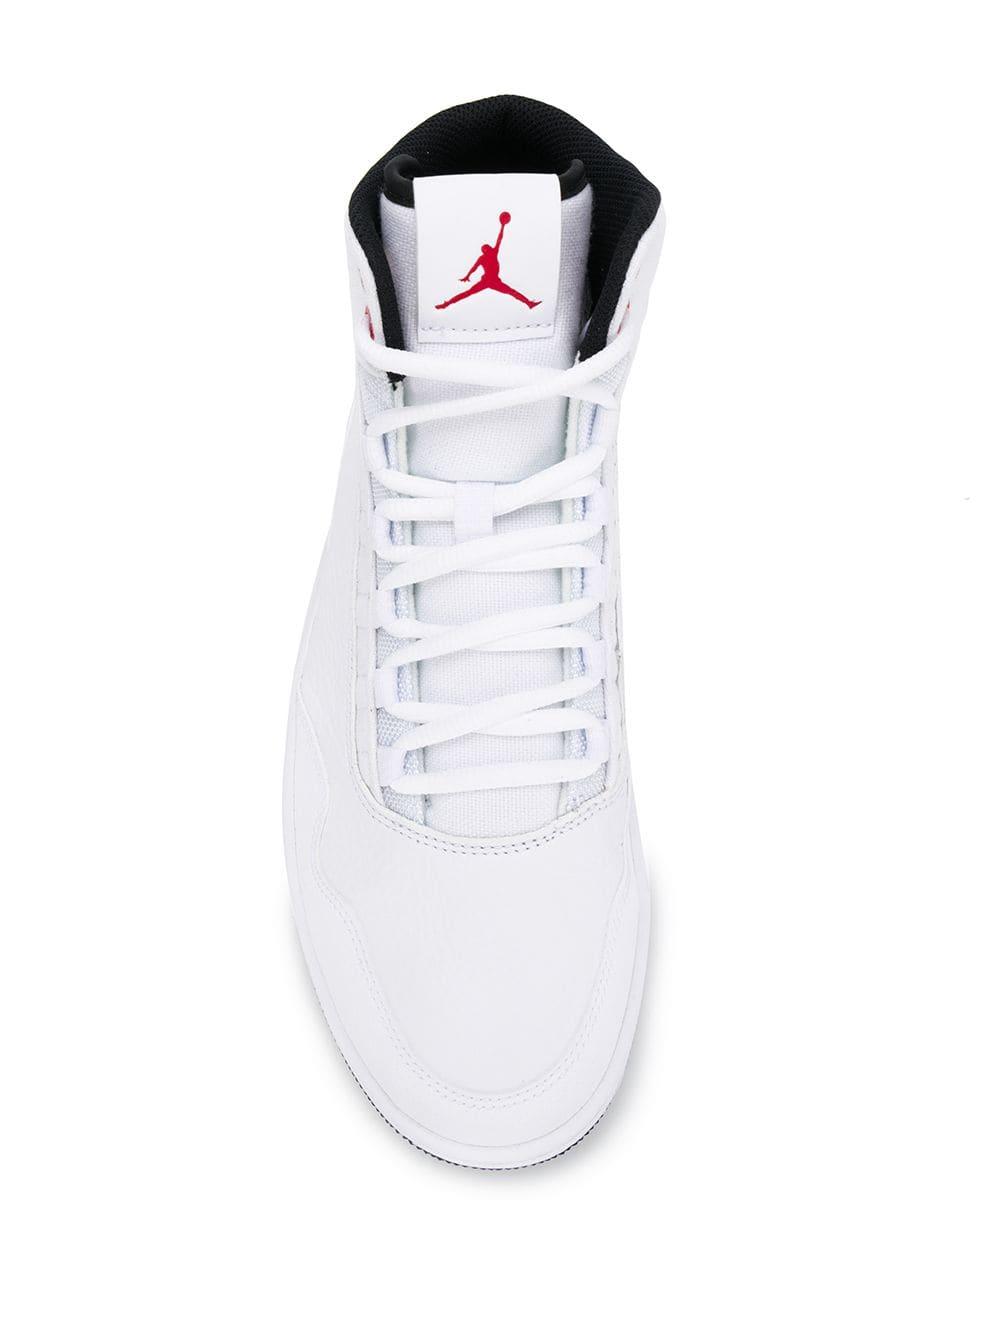 Nike Leather Jordan Executive Sneakers in White for Men - Lyst